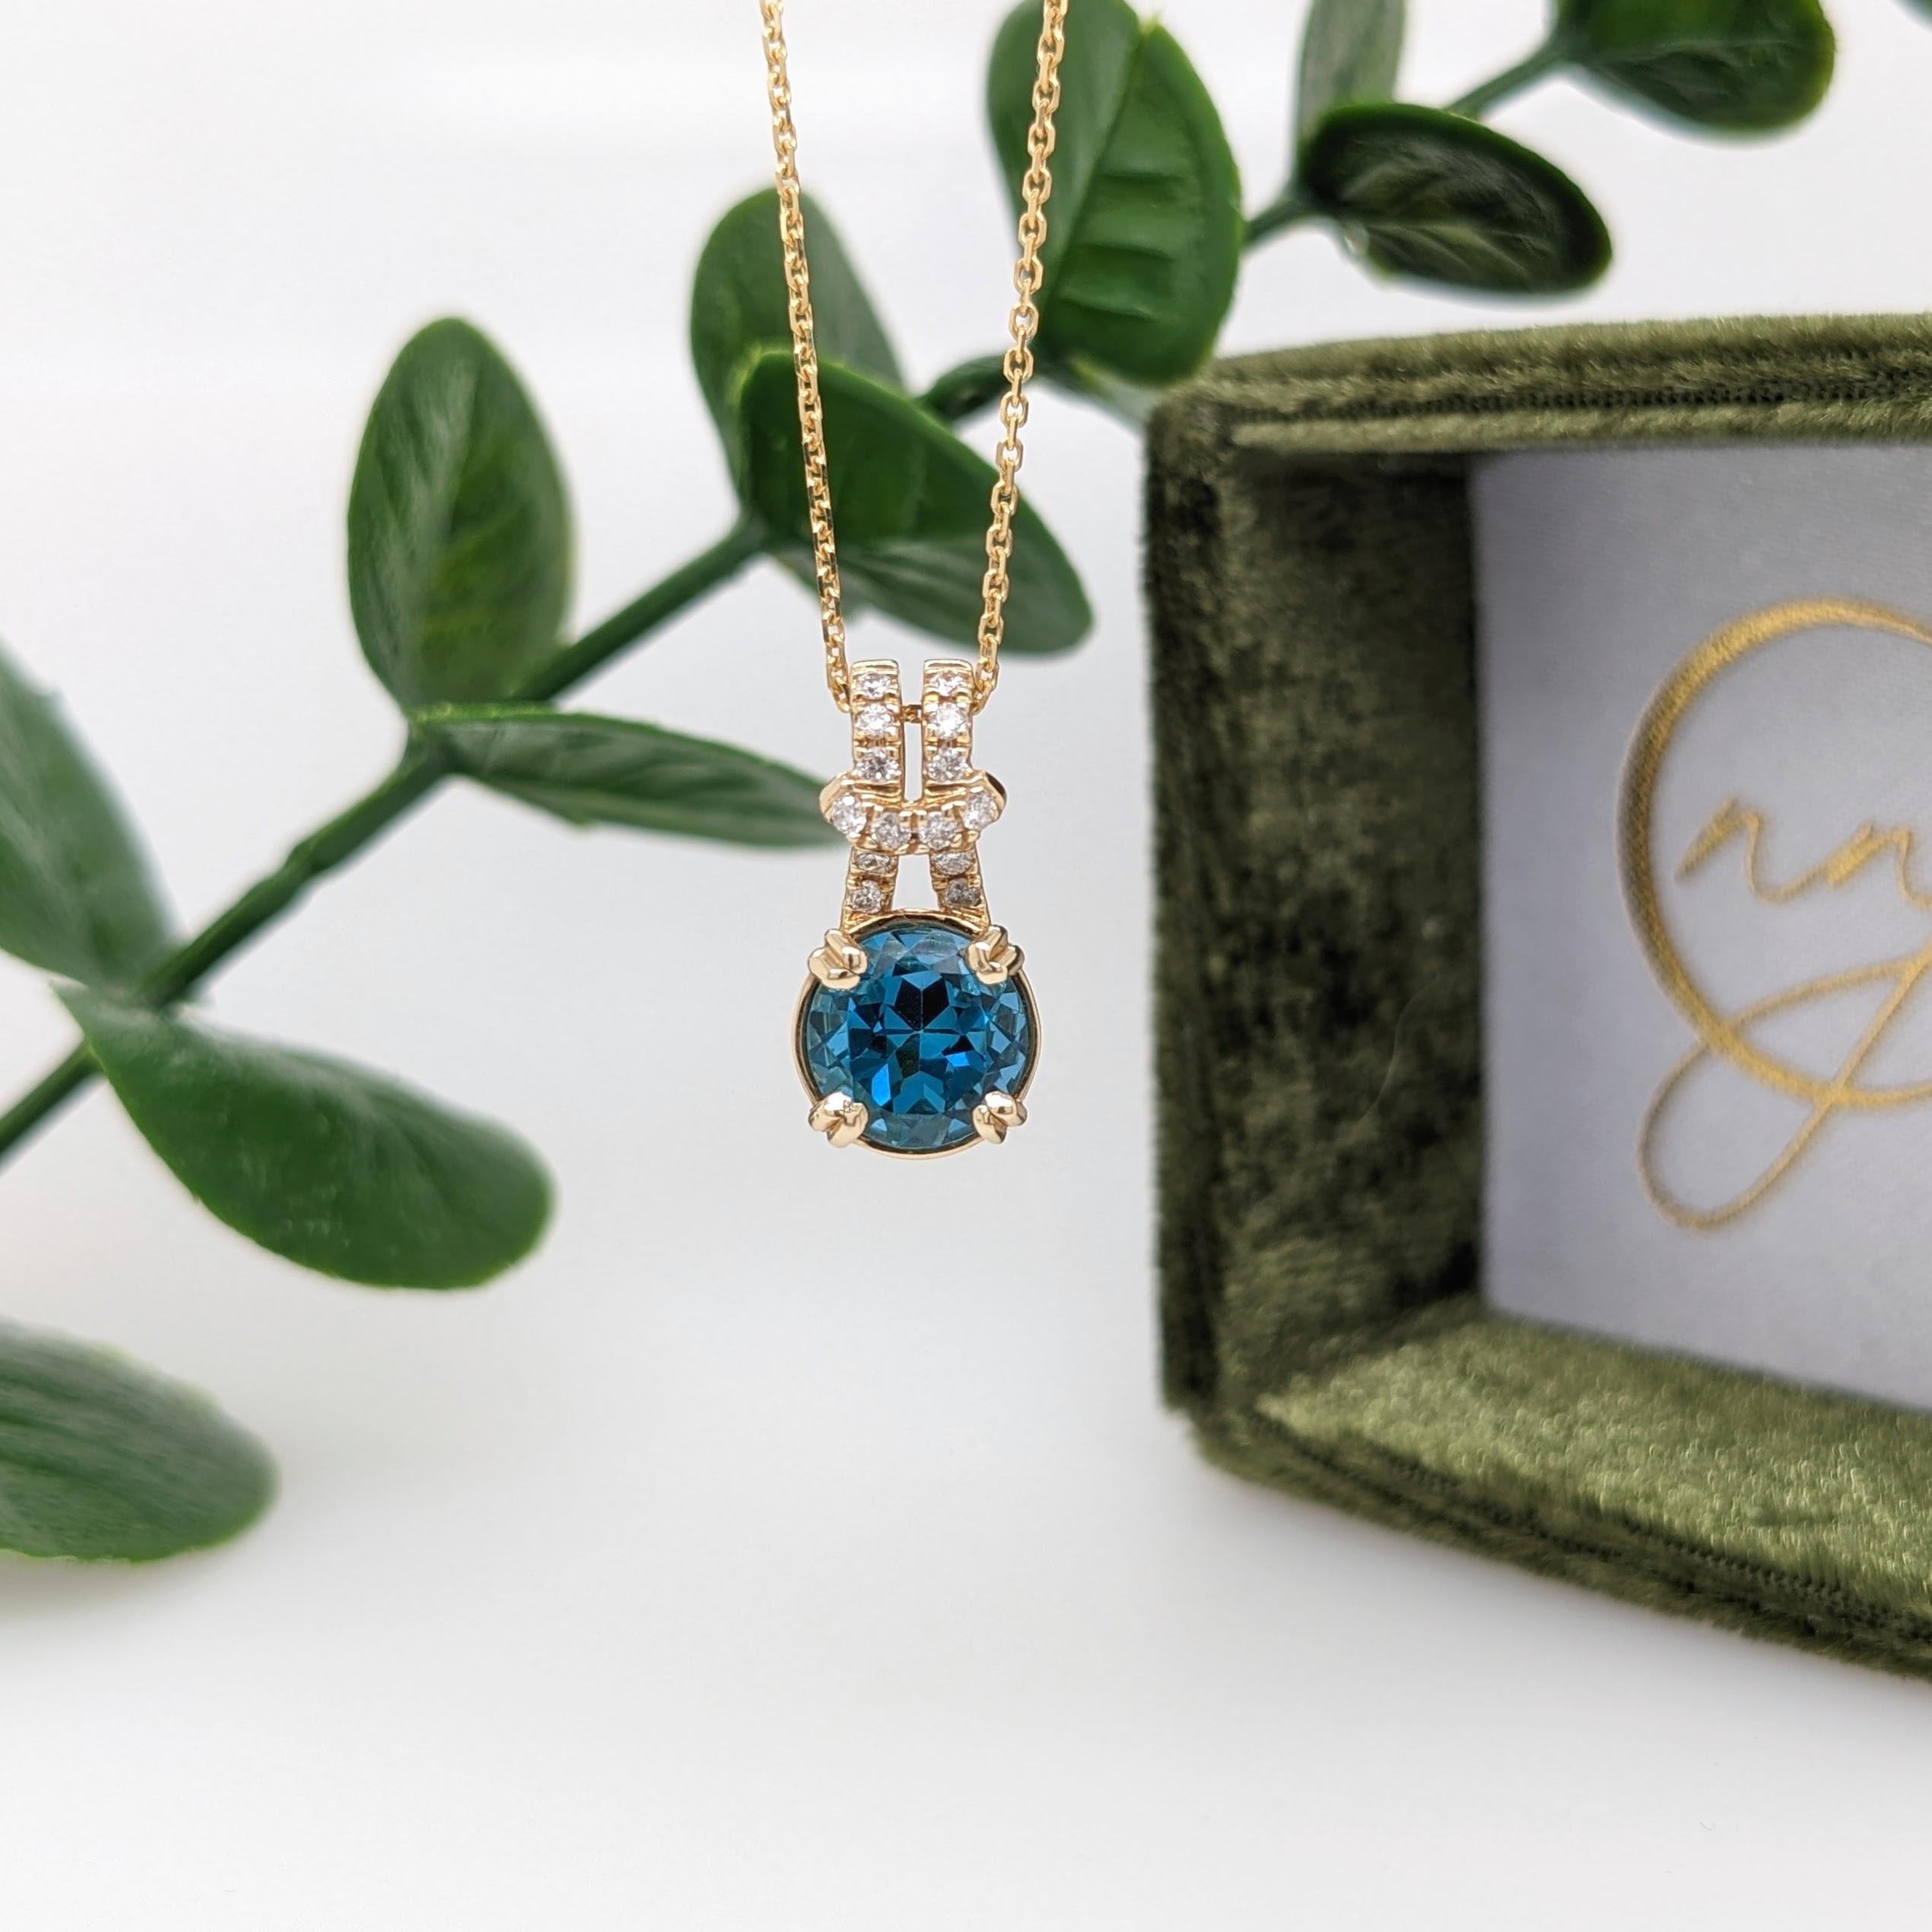 An absolutely adorable pendant featuring a beautiful blue shade of London Topaz, round cut and set in solid 14k yellow gold with all natural earth-mined diamond accents.

Perfect for gifts, anniversaries, or any special occasion!

Item Type: